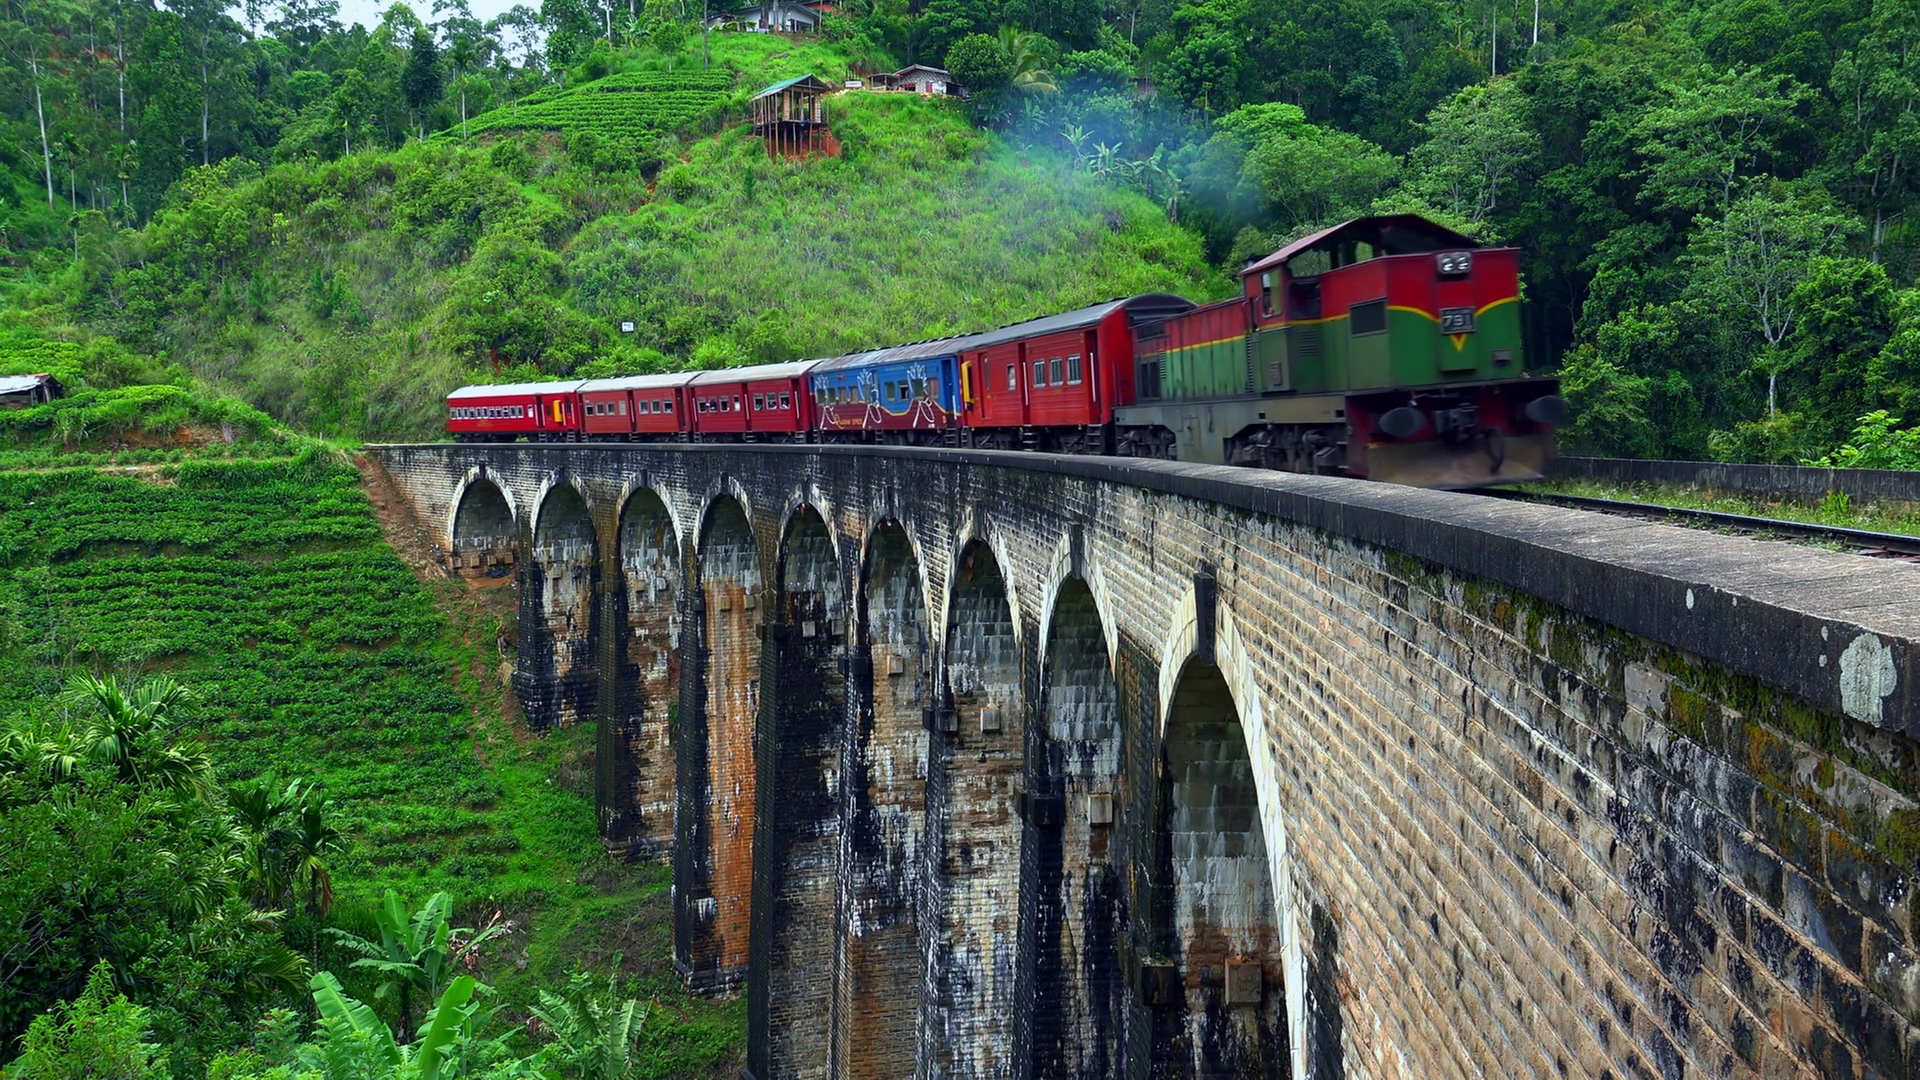 ELLA, SRI LANKA - March 11, 2016: Old train passing by 100 years old ...